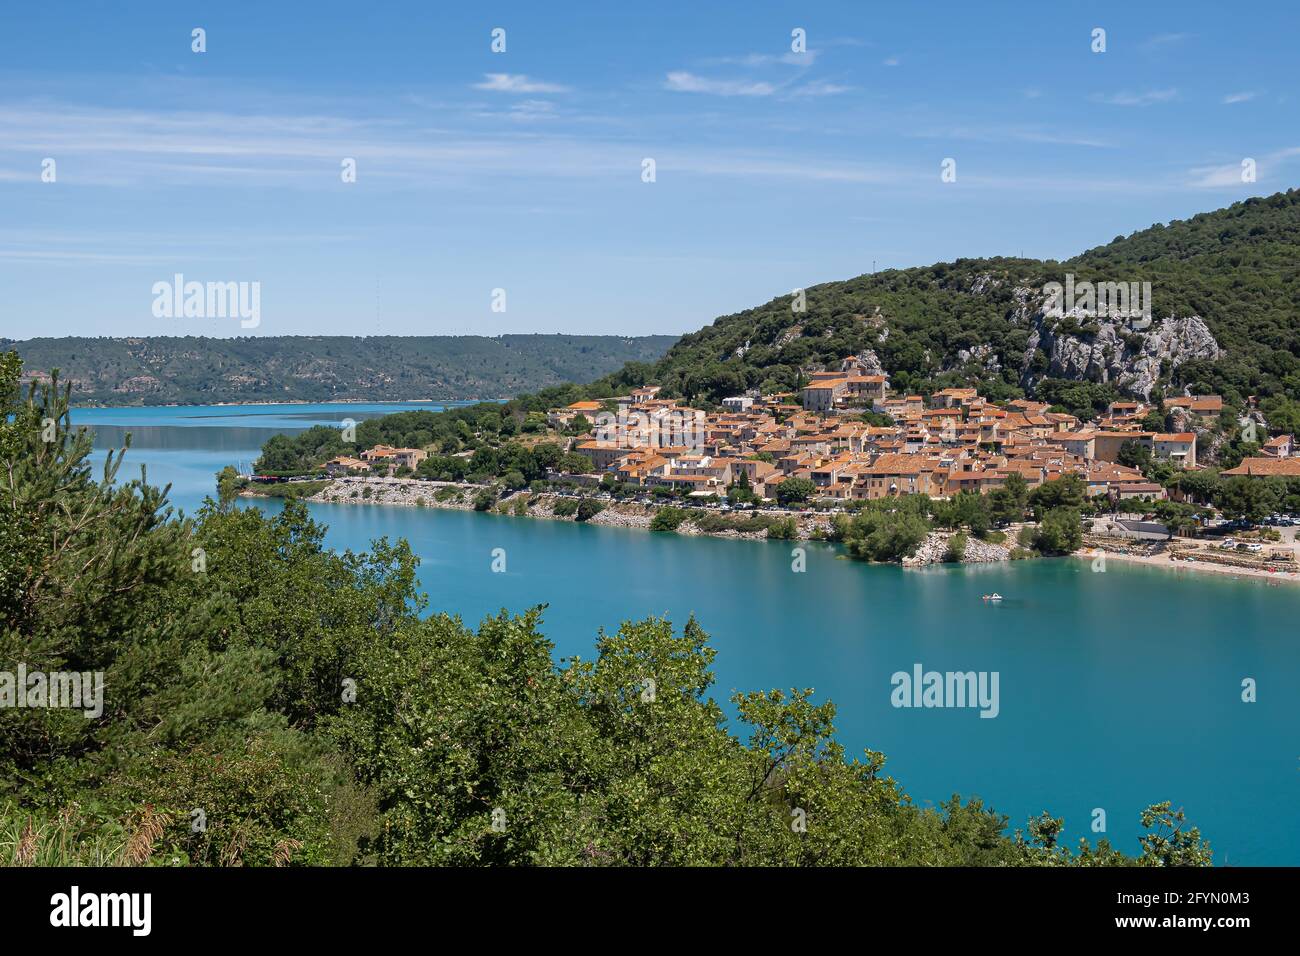 Bauduen, France - July 5, 2020: Bauduen and the Lake of the Holy Cross - Le lac de Sainte Croix in Provence Stock Photo